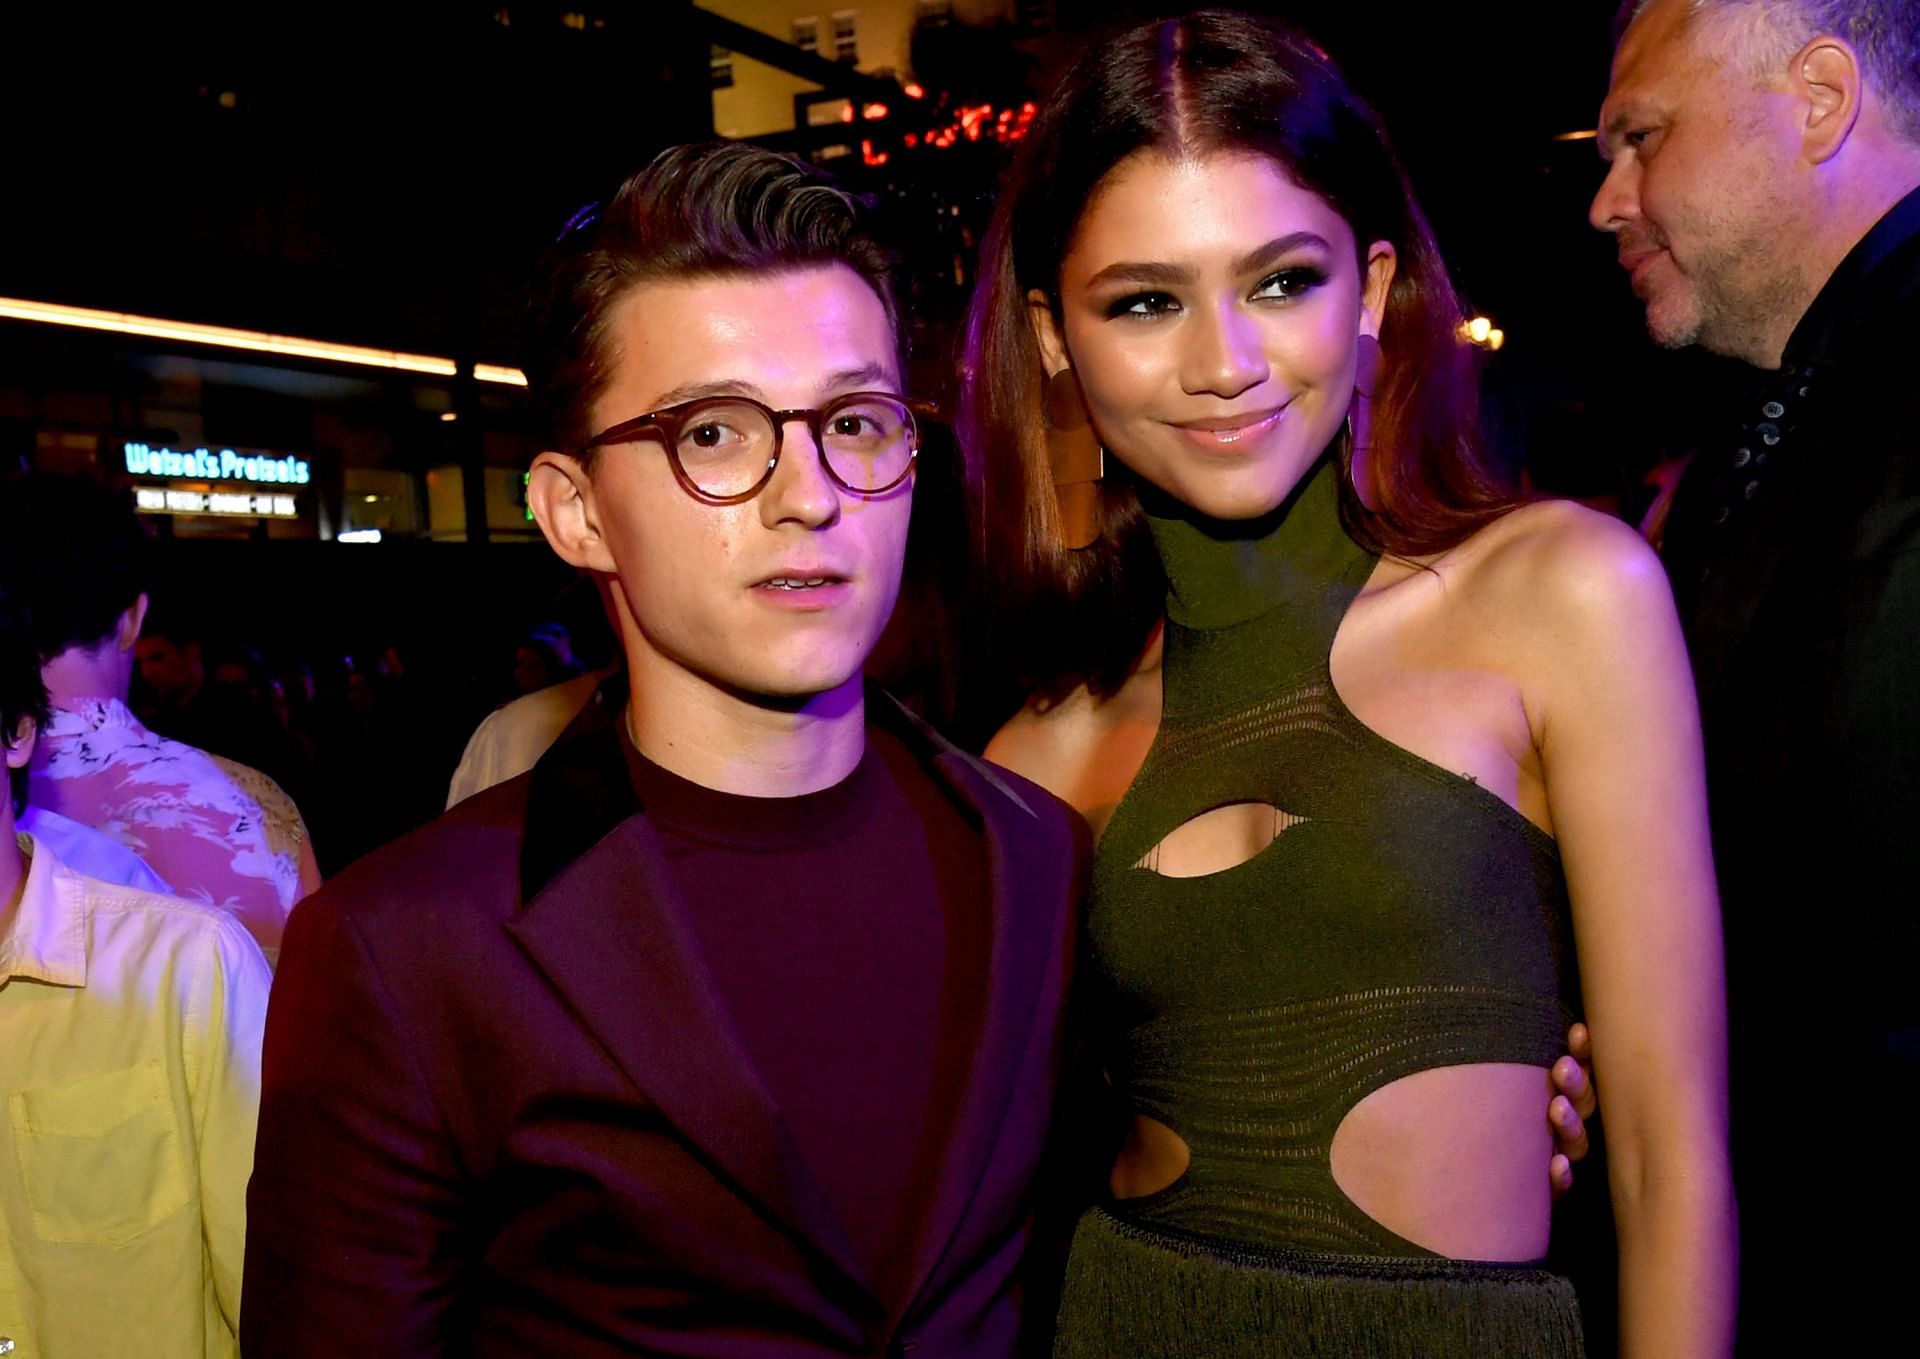 Tom Holland and Zendaya (Image Credits: Kevin Winter/Getty Images)